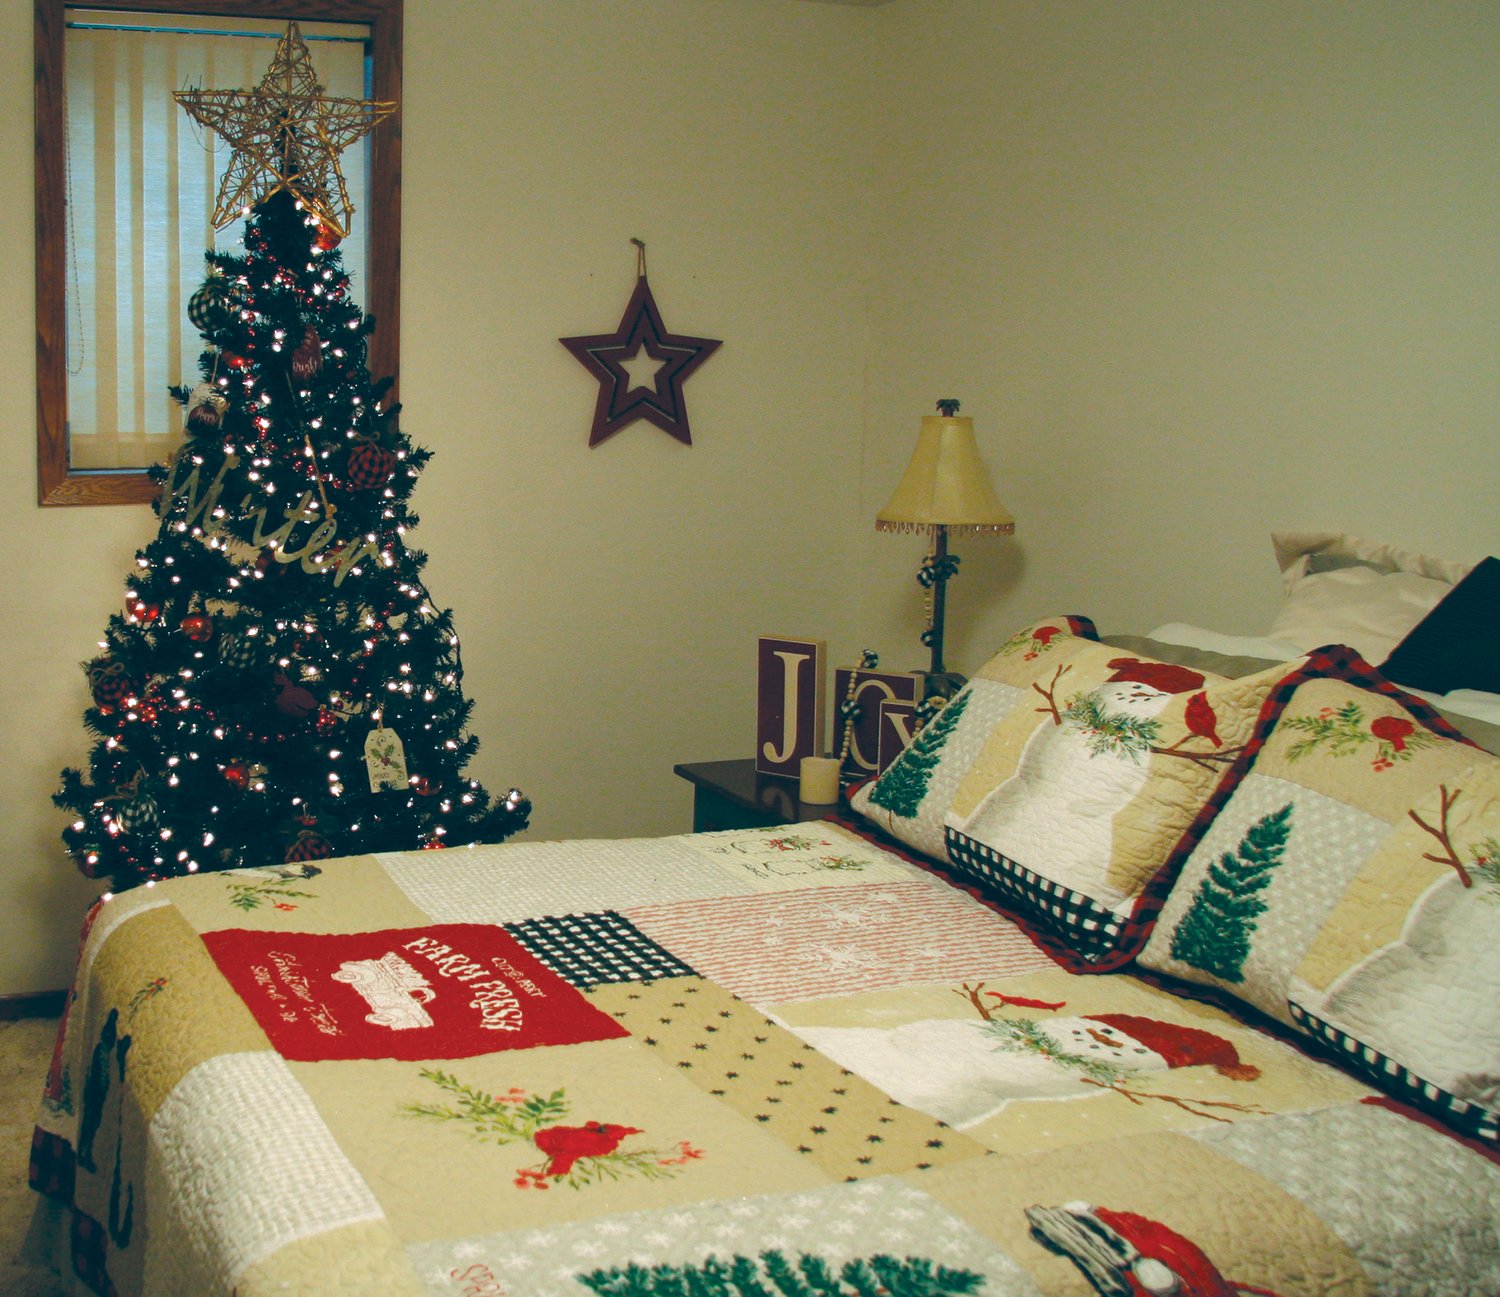 Bedrooms in Sheryl's home have also been decorated for this year's Tour of Homes.